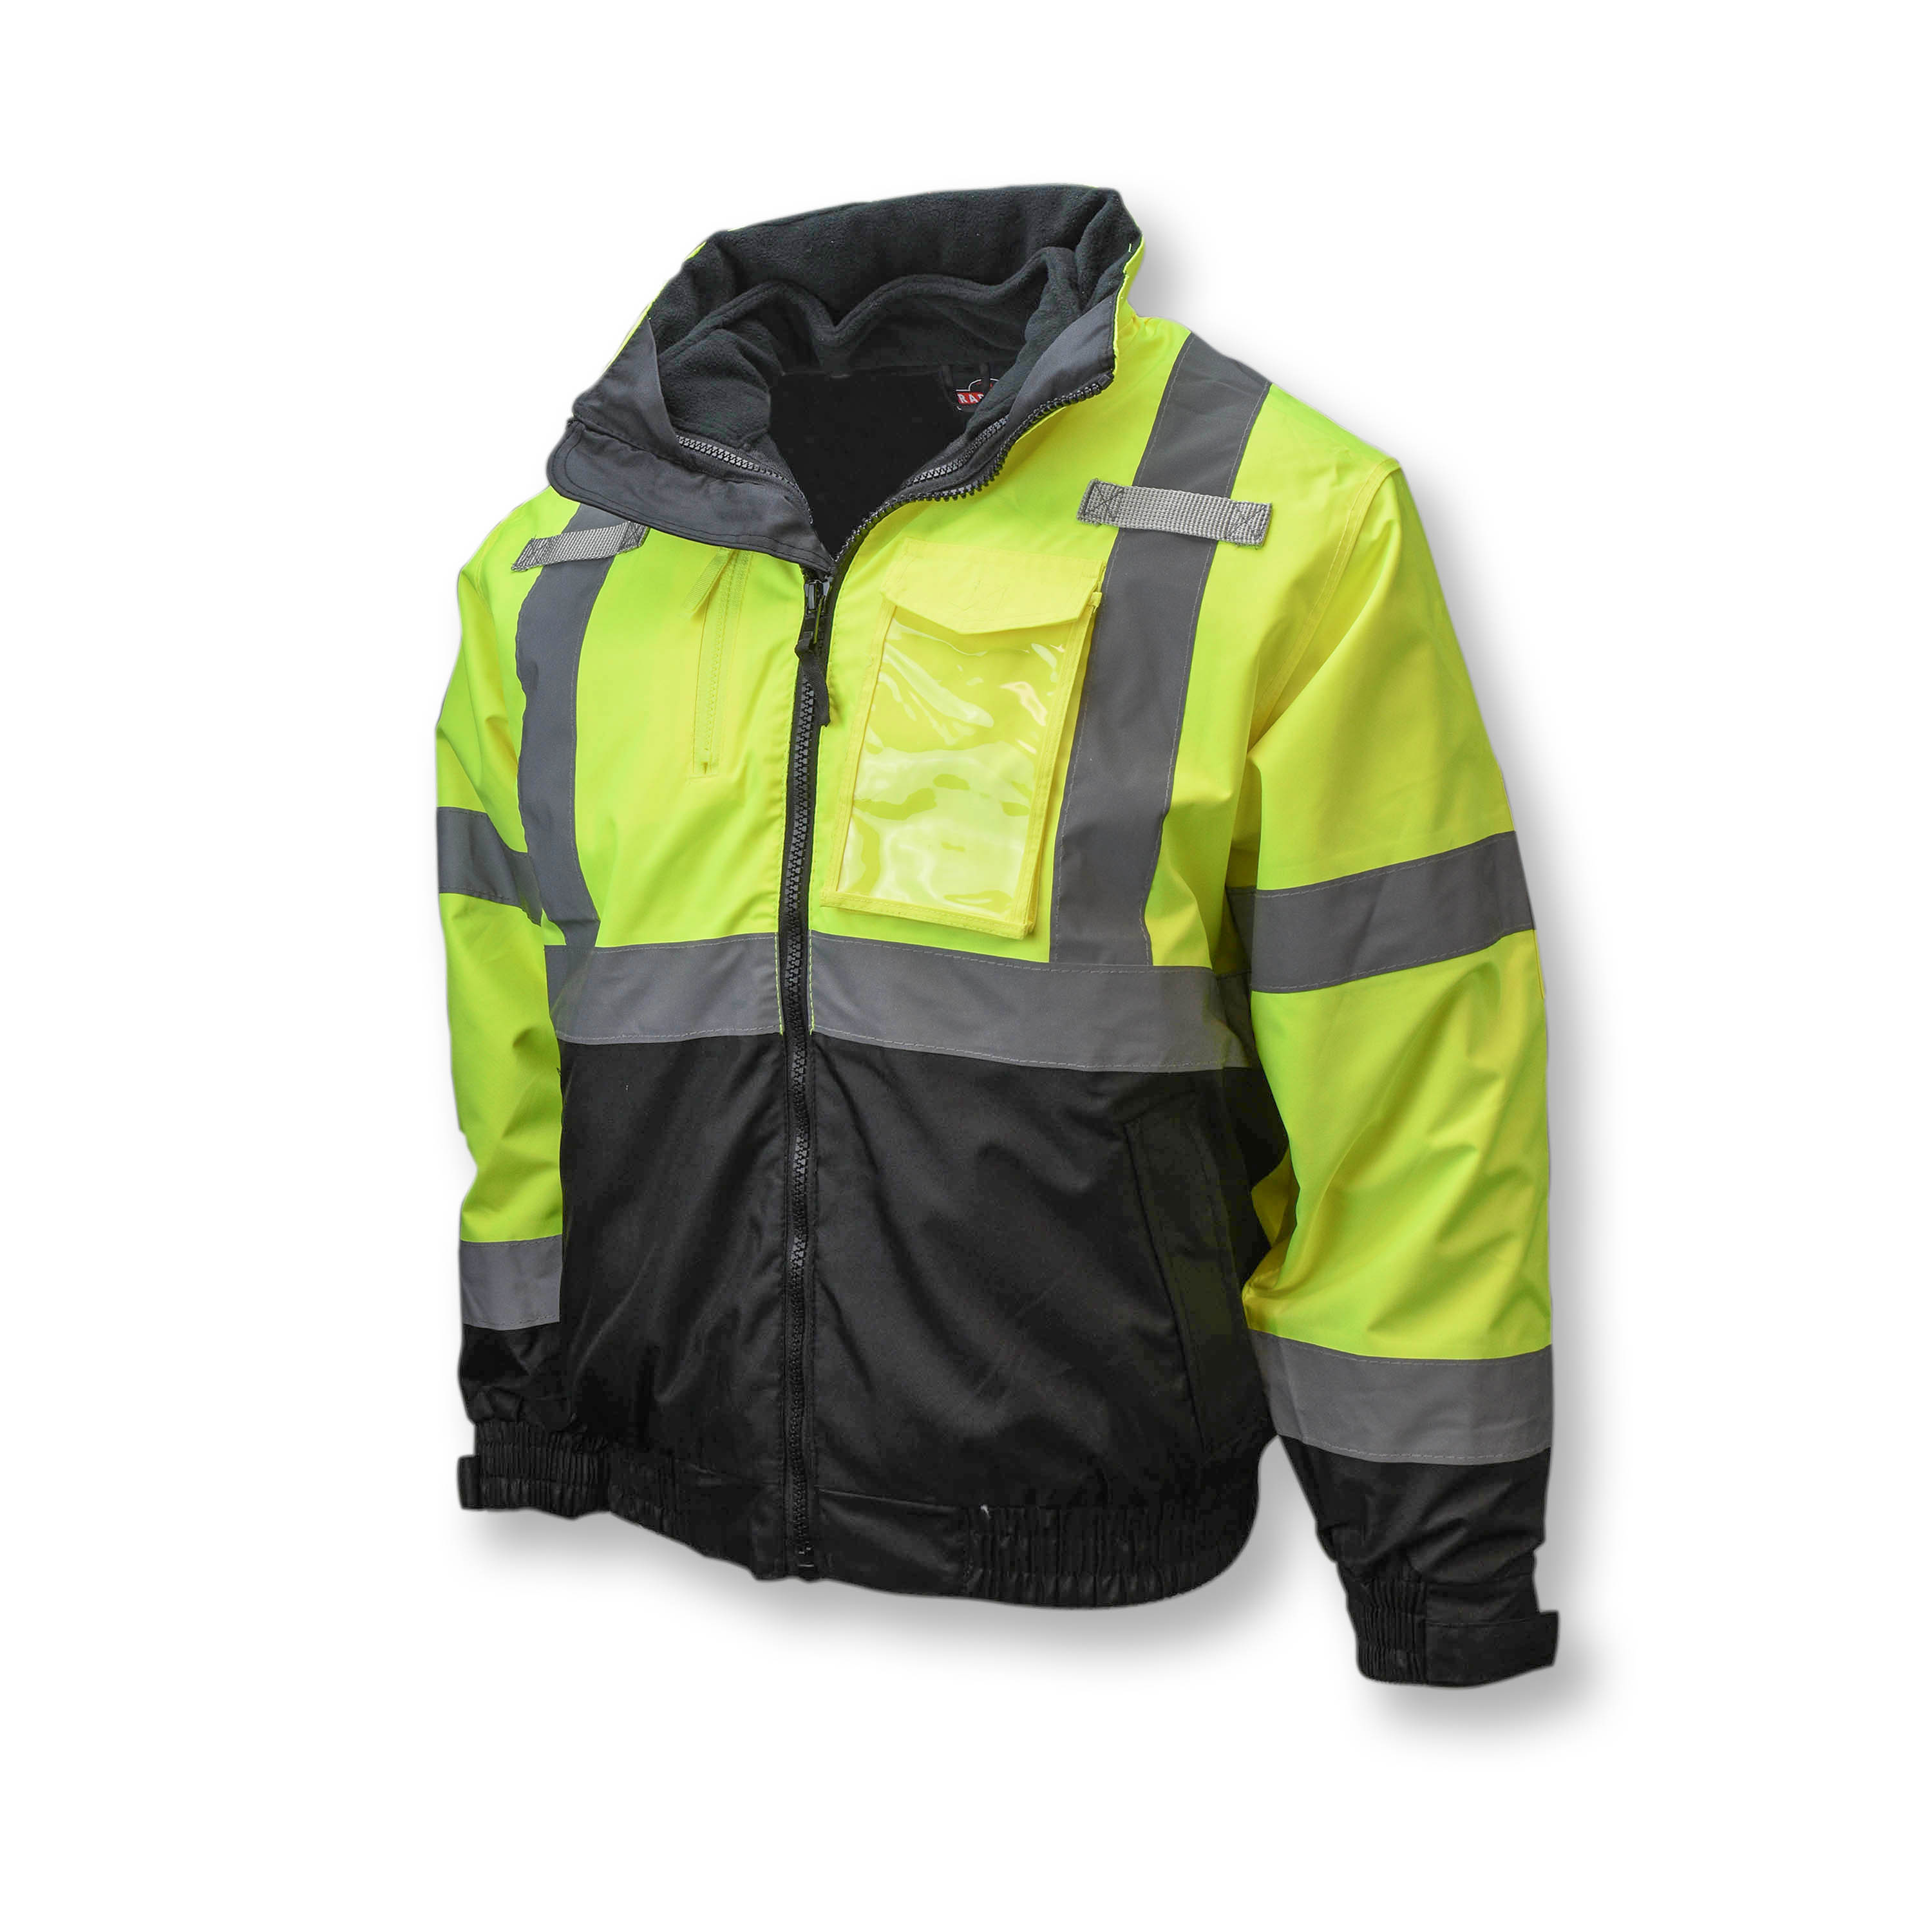 SJ210B Three-in-One Deluxe High Visibility Bomber Jacket - Green/Black Bottom - Size L